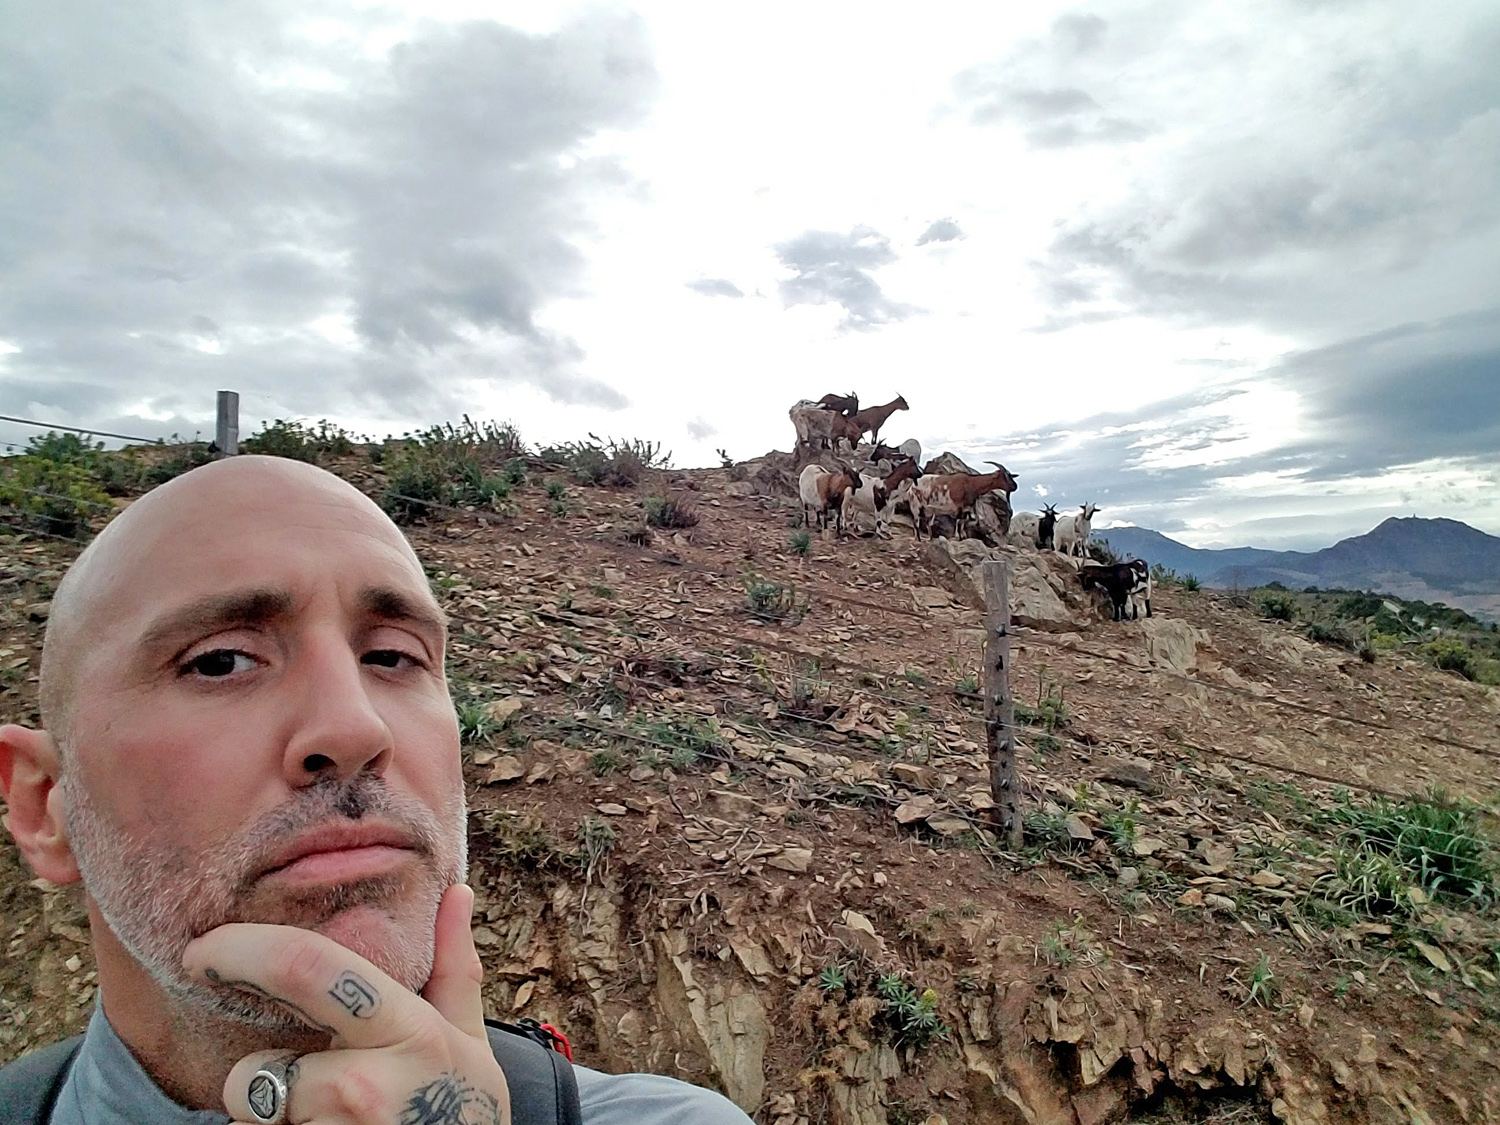 InsideHook creative director Danny Agnew takes a selfie with some goats in southwestern France